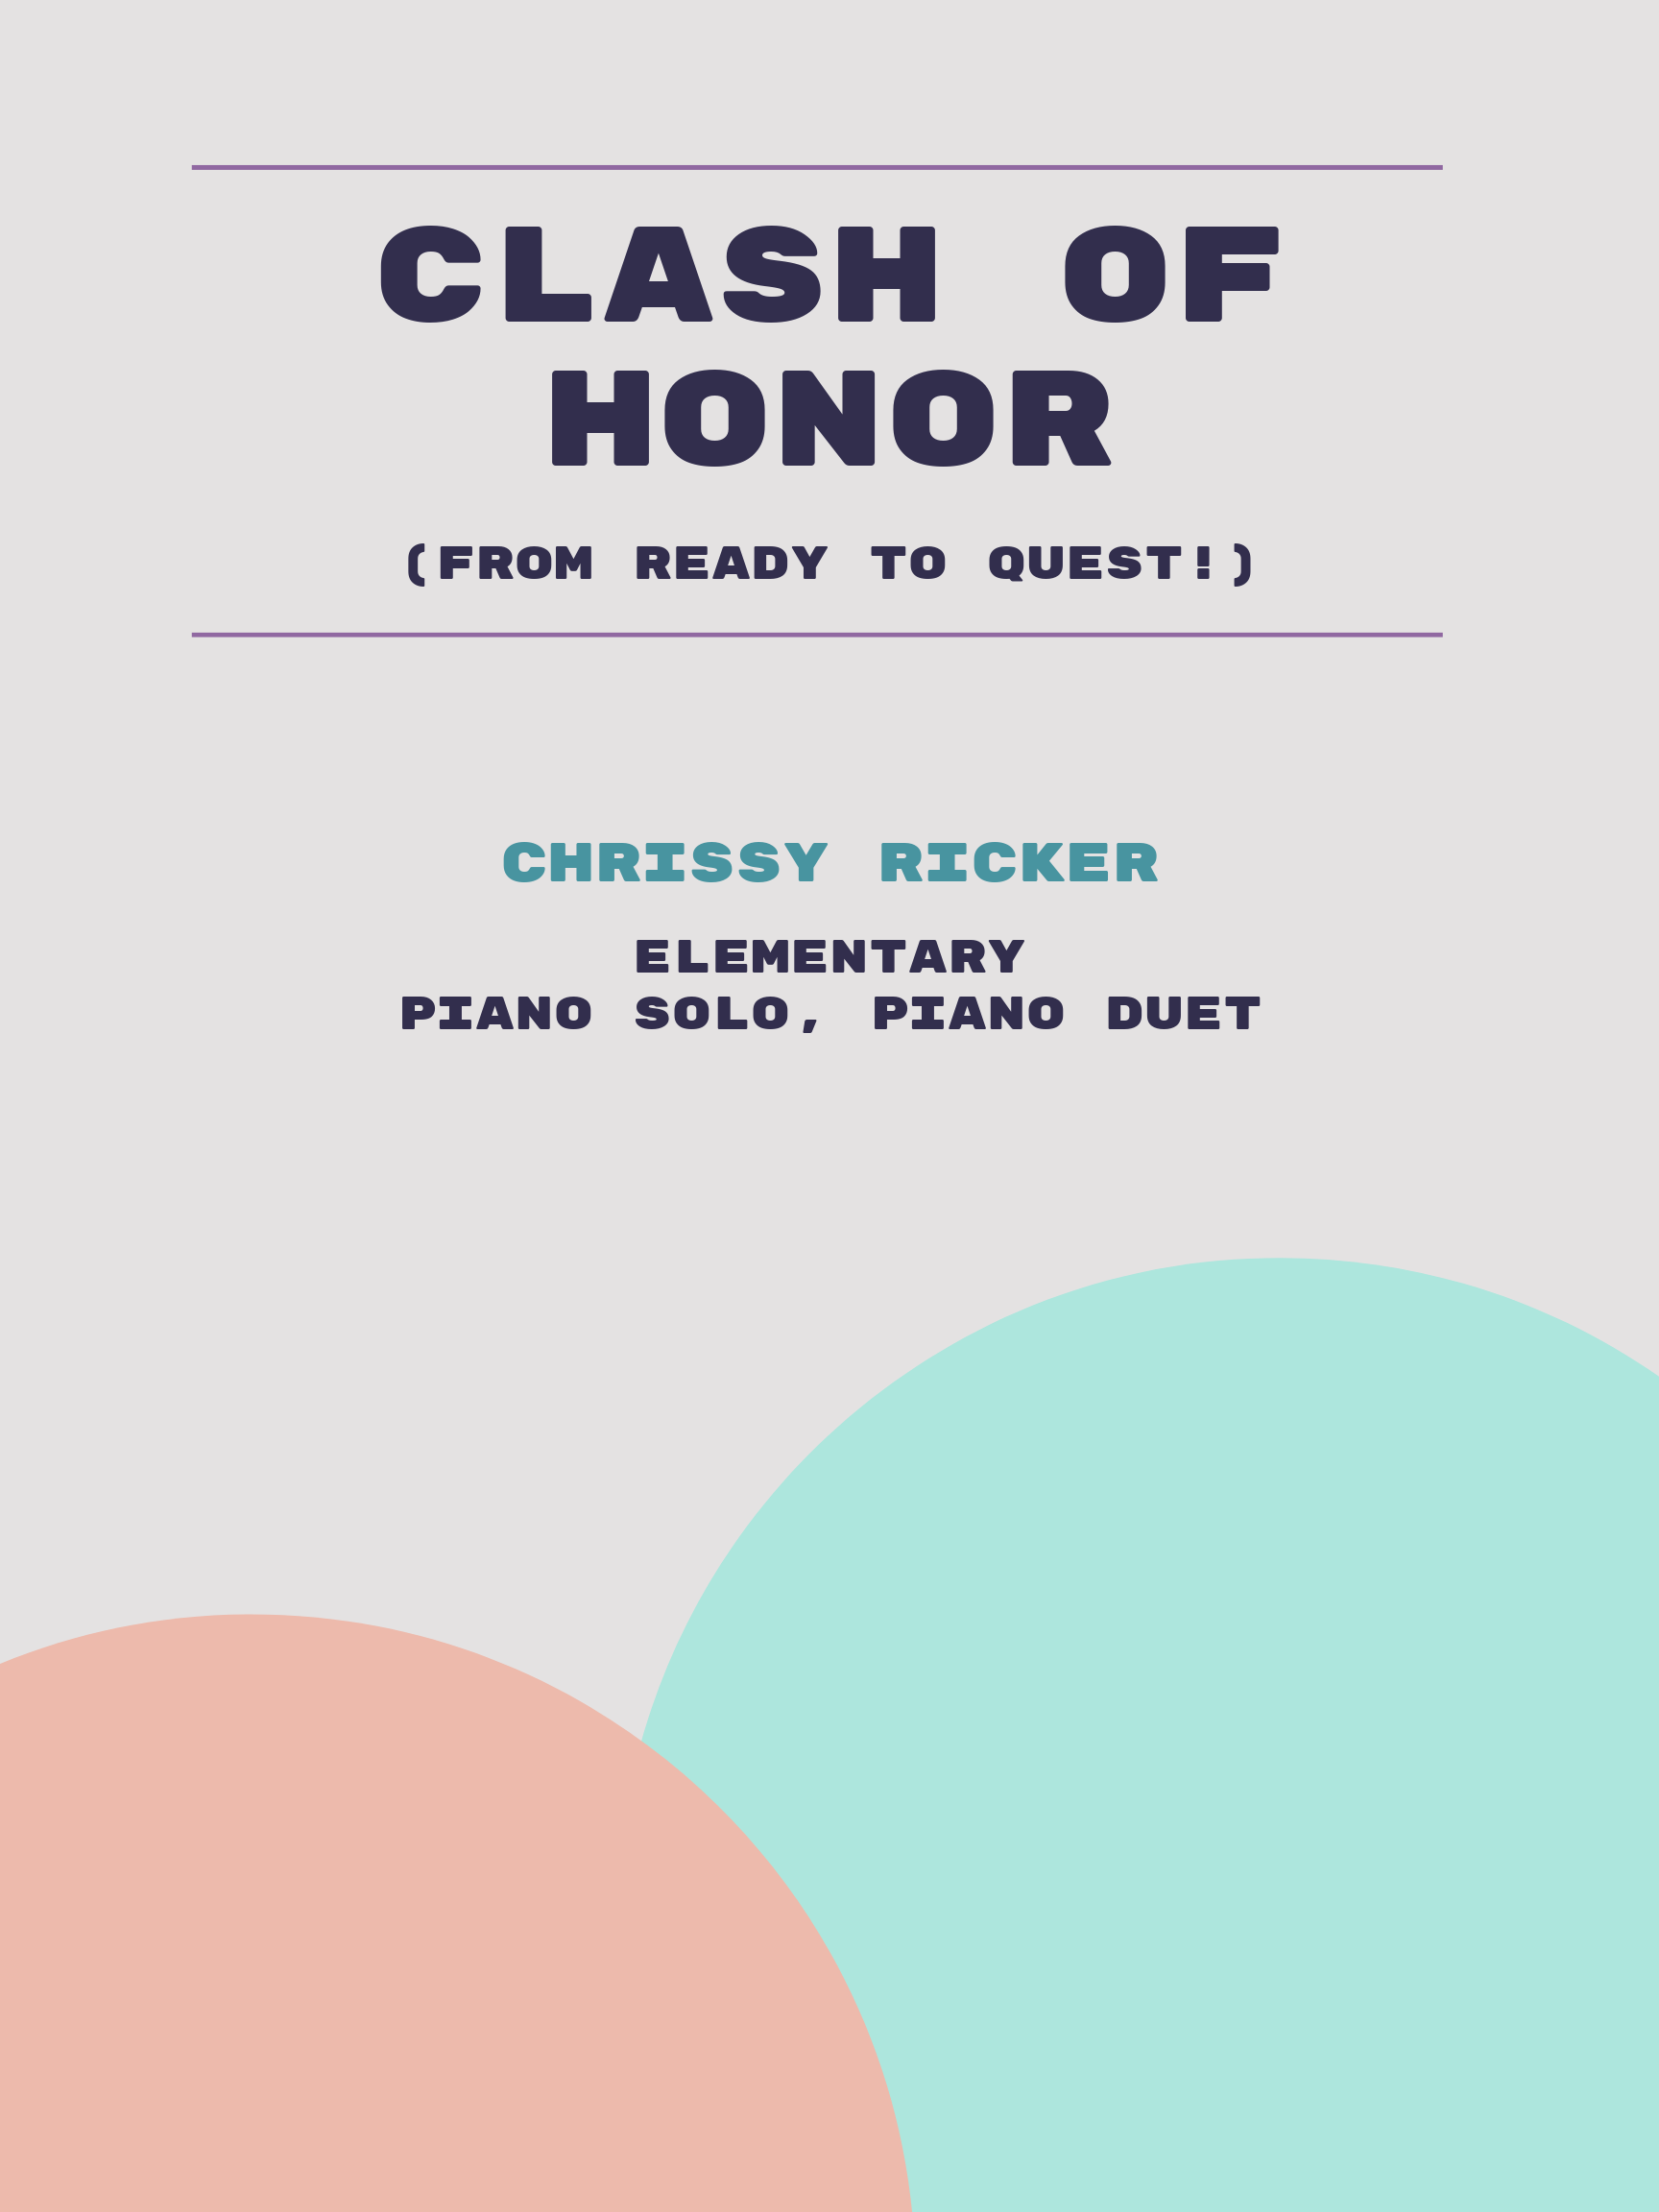 Clash of Honor by Chrissy Ricker